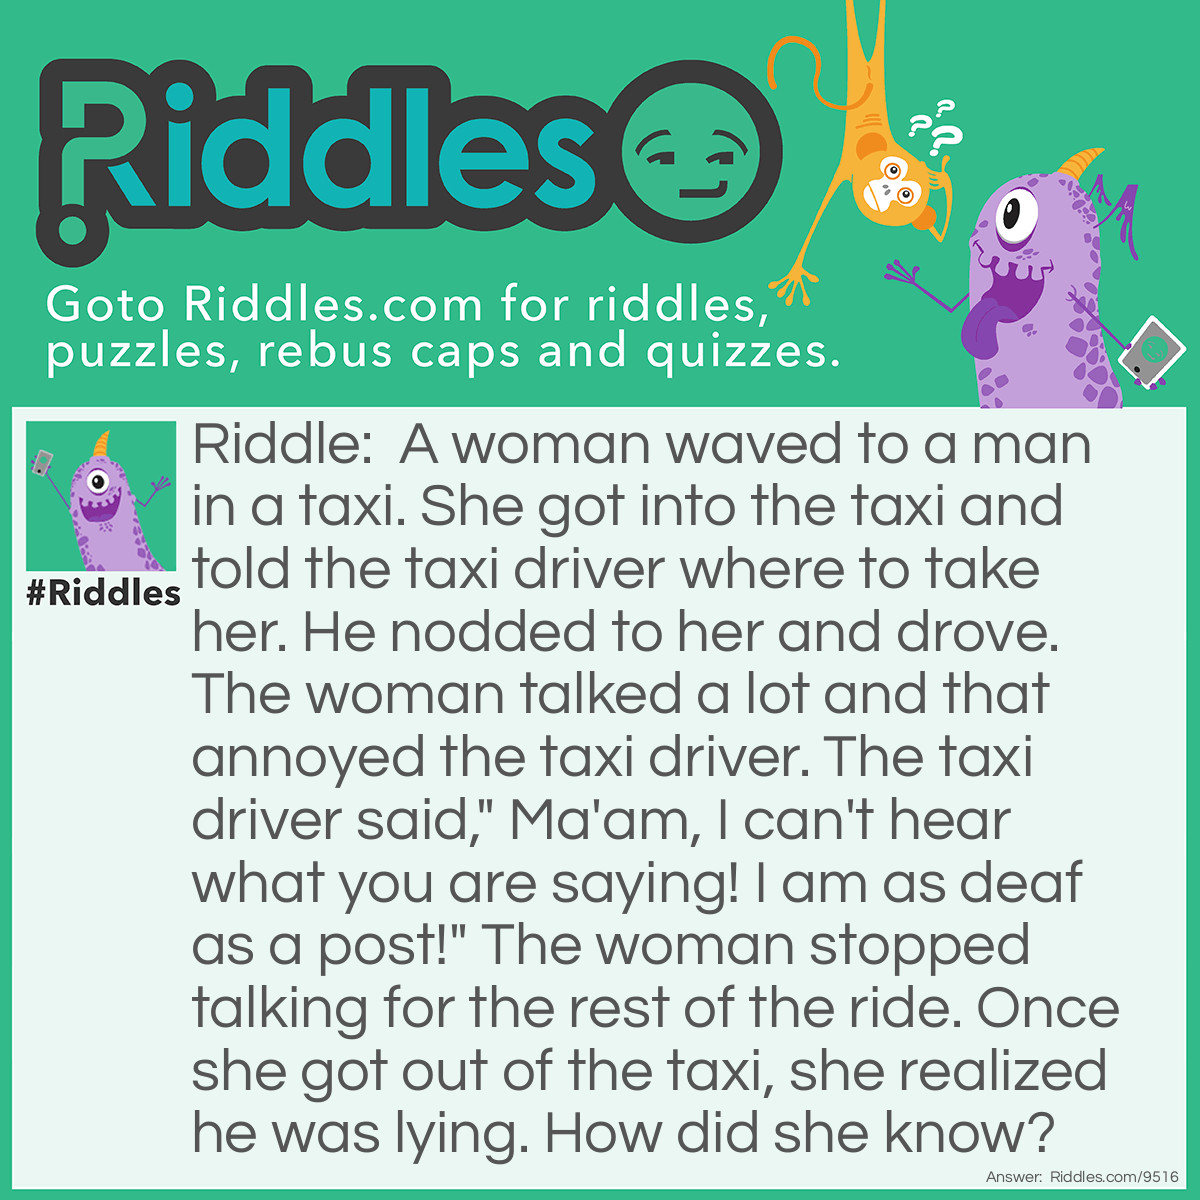 Riddle: A woman waved to a man in a taxi. She got into the taxi and told the taxi driver where to take her. He nodded to her and drove. The woman talked a lot and that annoyed the taxi driver. The taxi driver said," Ma'am, I can't hear what you are saying! I am as deaf as a post!" The woman stopped talking for the rest of the ride. Once she got out of the taxi, she realized he was lying. How did she know? Answer: There are two ways she figured out: 1. He would have had to hear her to know she was talking as he was focusing on driving. 2. He would not have heard her directions if he was deaf and wouldn't have nodded in response as a way to confirm he got the directions.